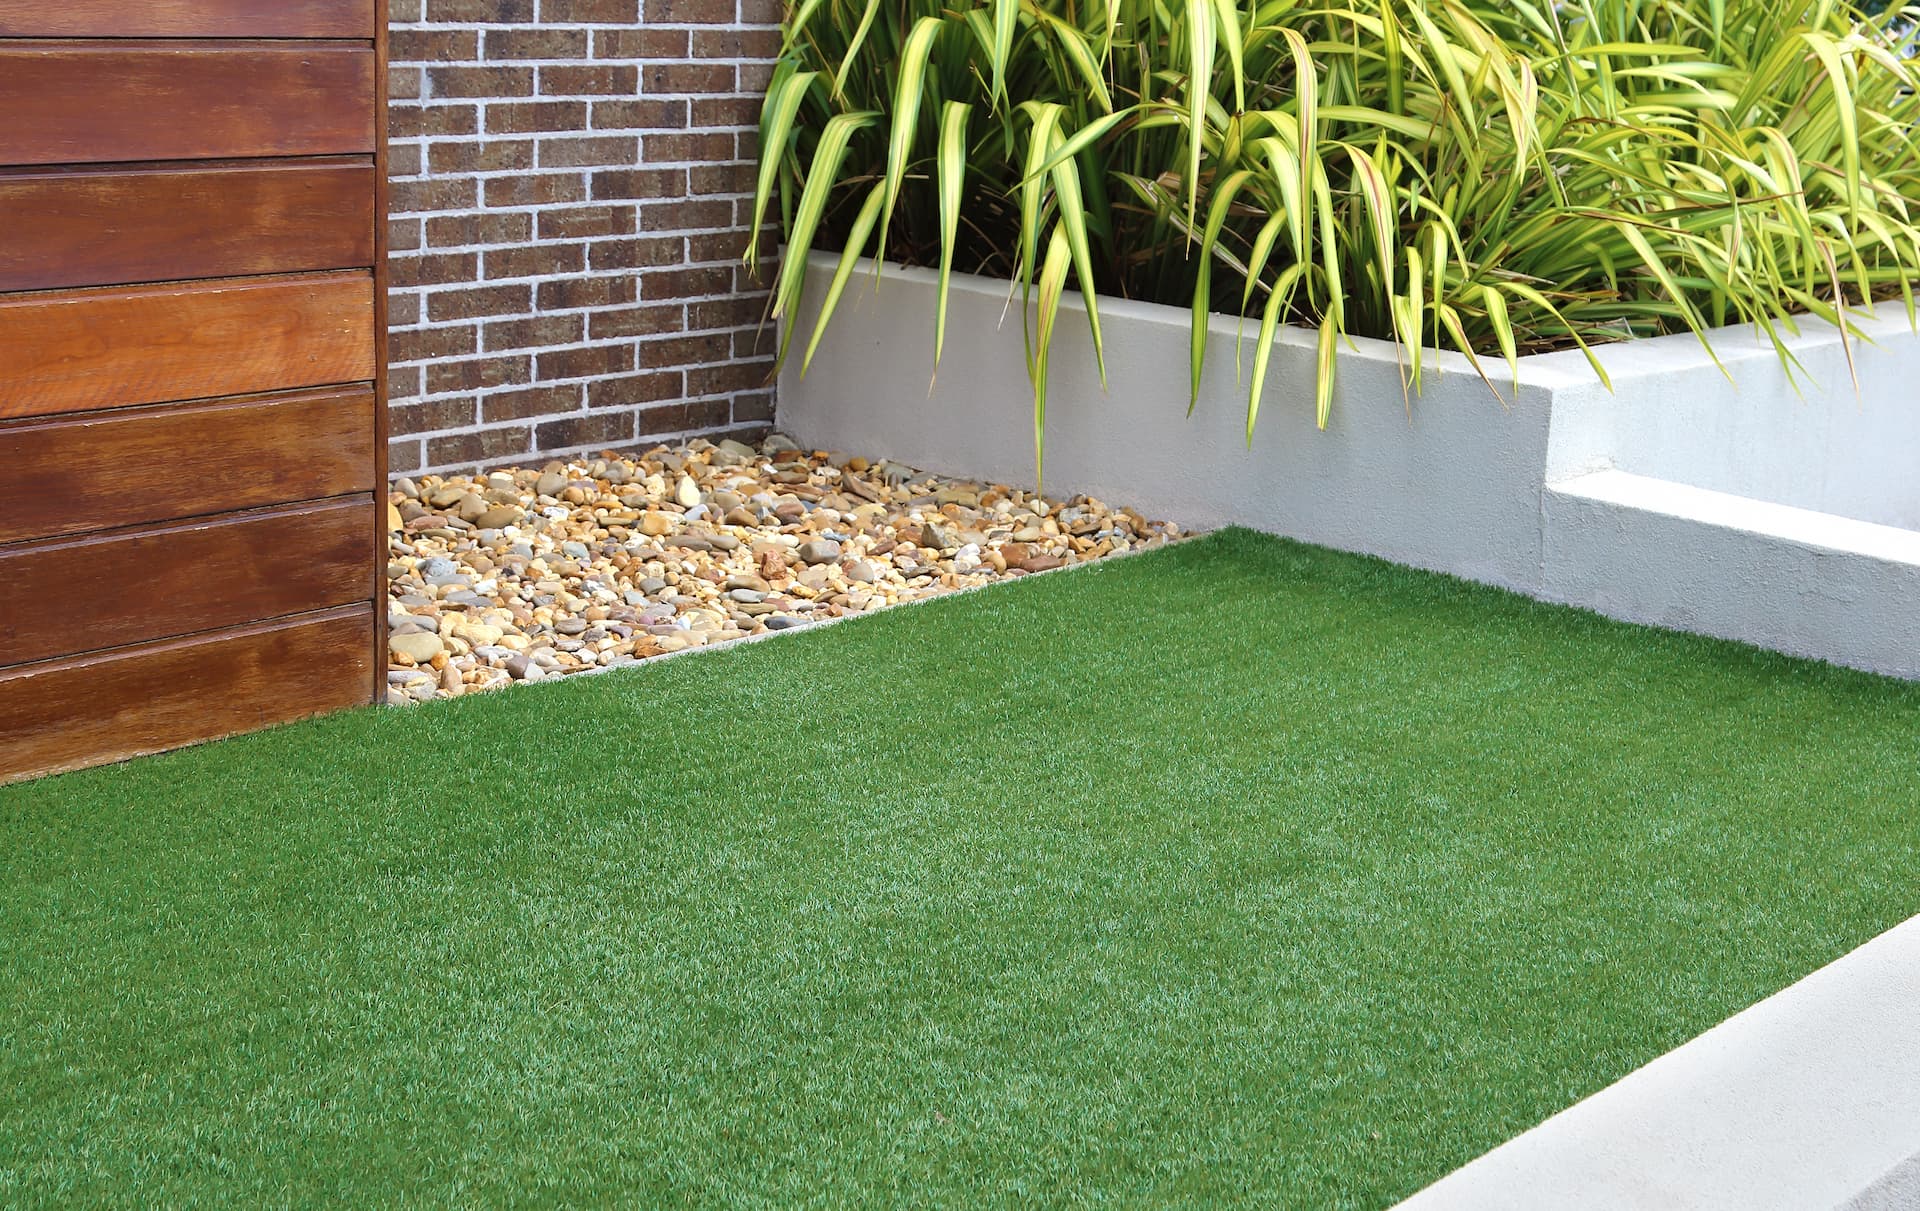 Licenced Artificial Grass & Turf services in Morley Green